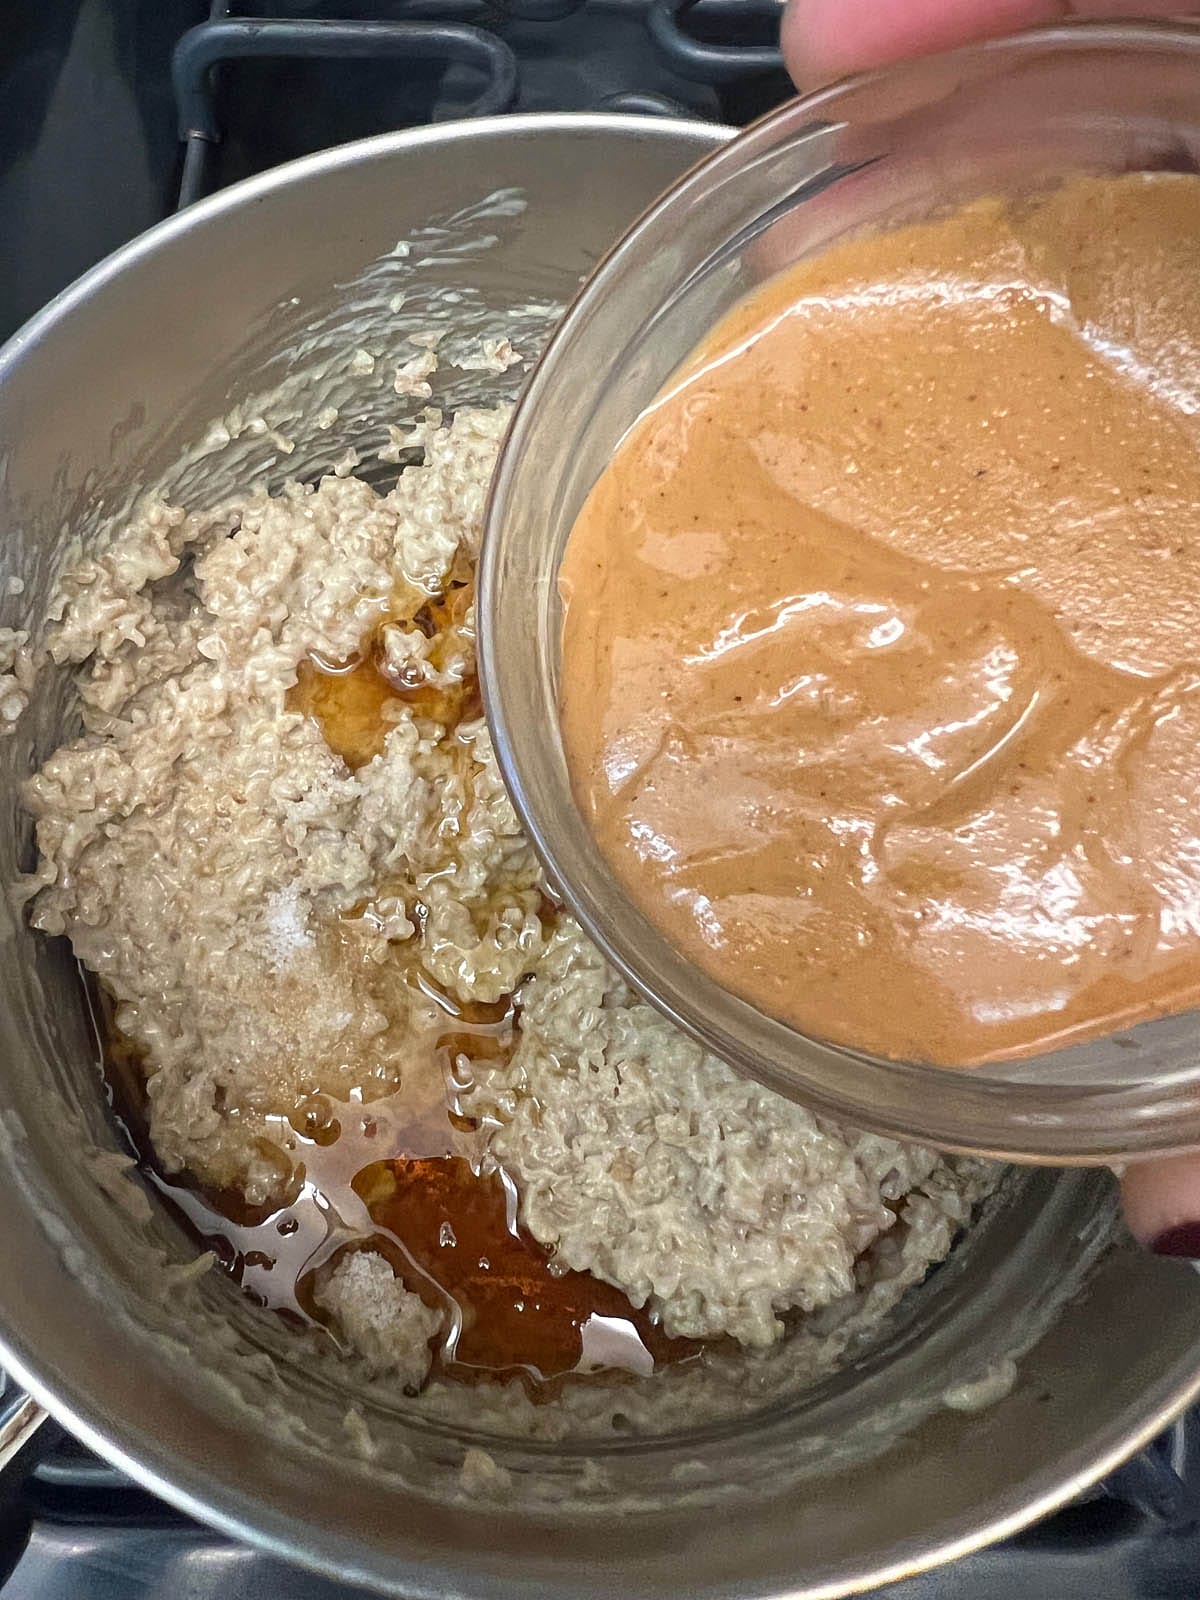 Peanut butter being added to steel cut oat recipe with the rest of the ingredients.